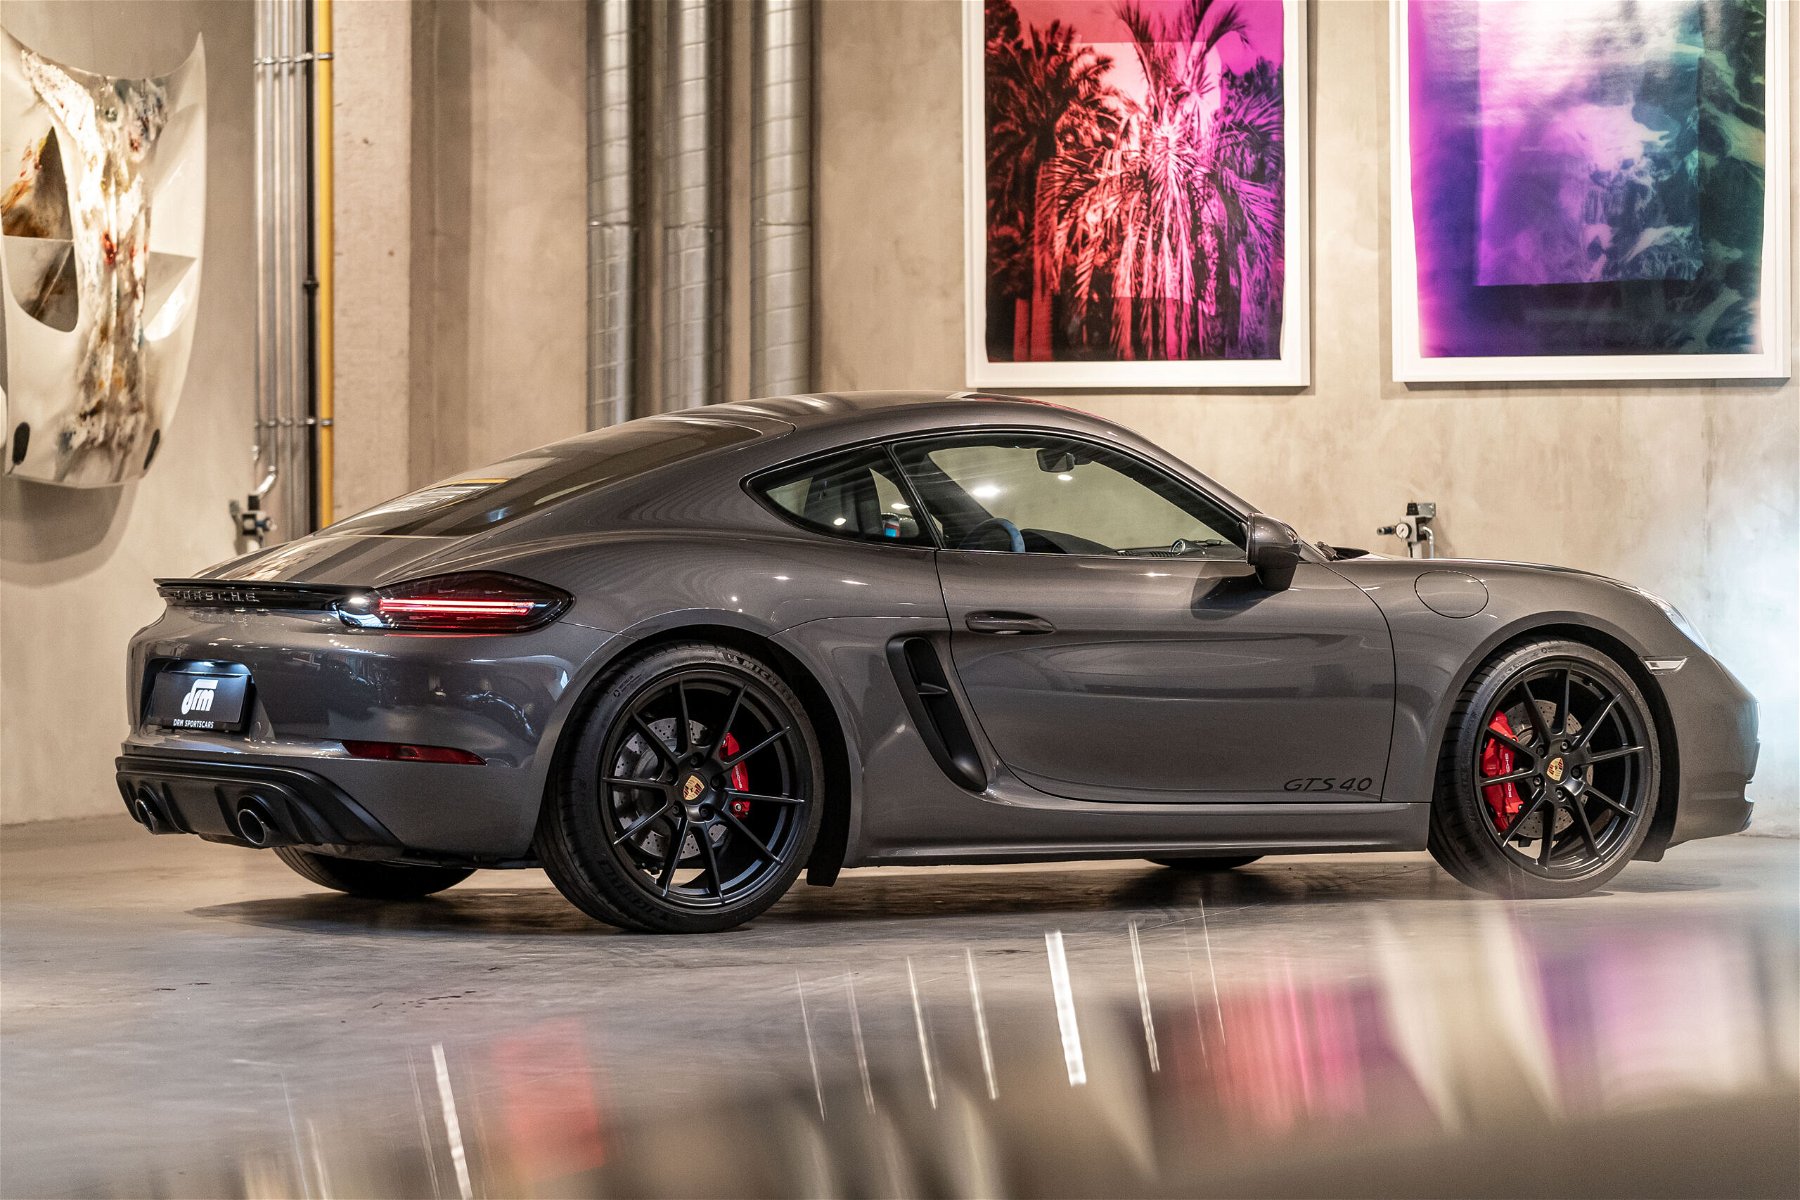 Porsche 718 Cayman GTS 4.0 (2020) review: holy grail hunting